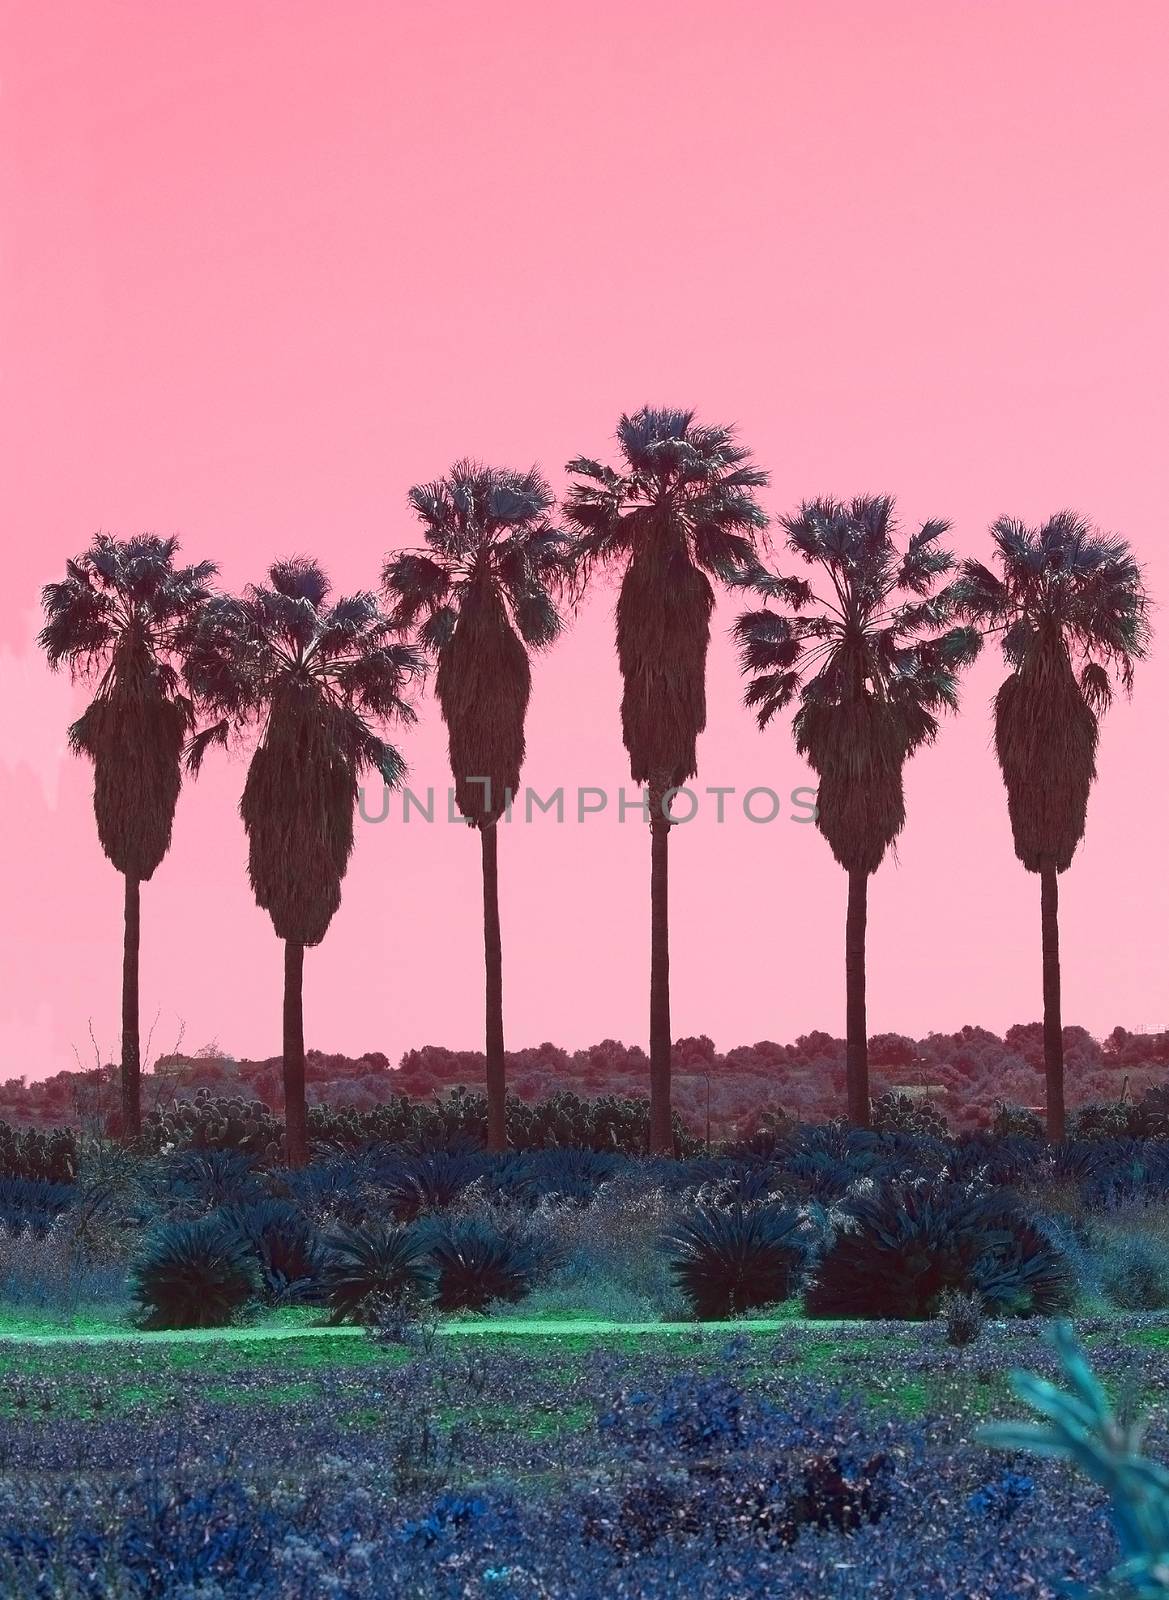 Palm trees in a row abstract surrealistic pink and green color  by ArtesiaWells